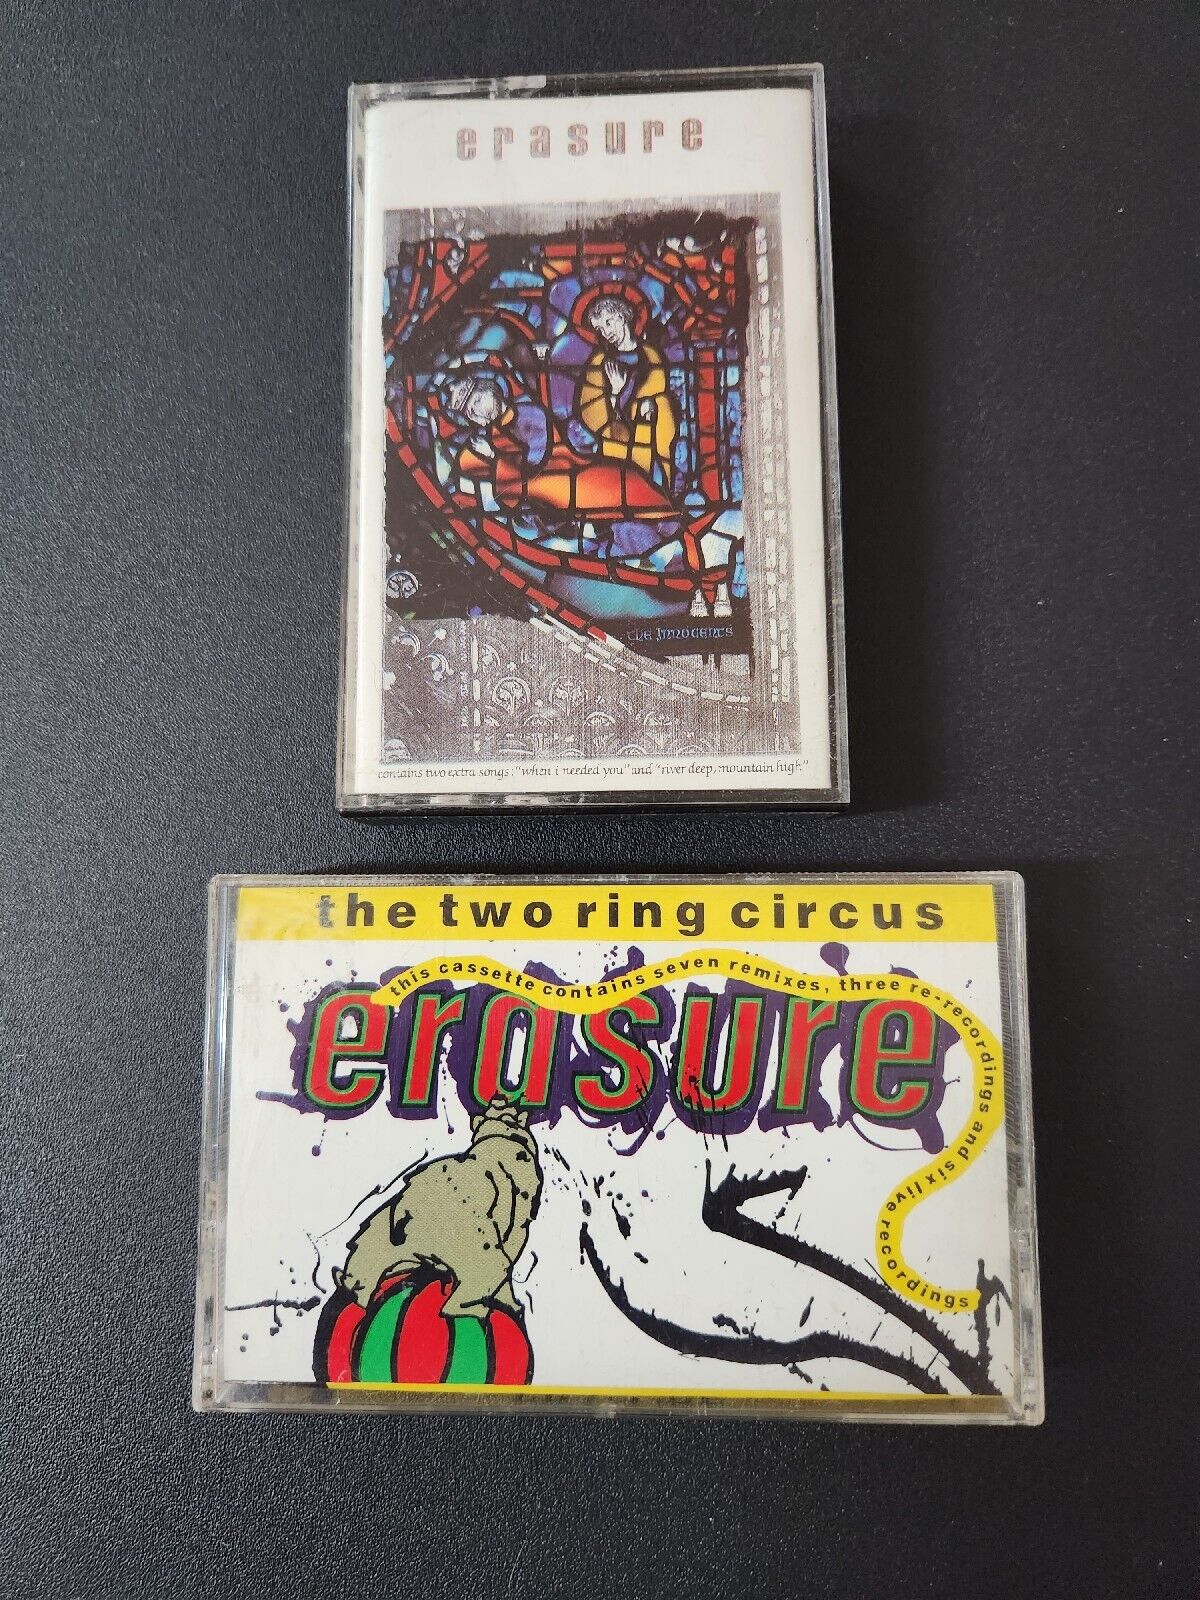 VINTAGE PAIR OF CASSETTE TAPES BY ERASURE TWO RING CIRCUS AND THE INNOCENTS